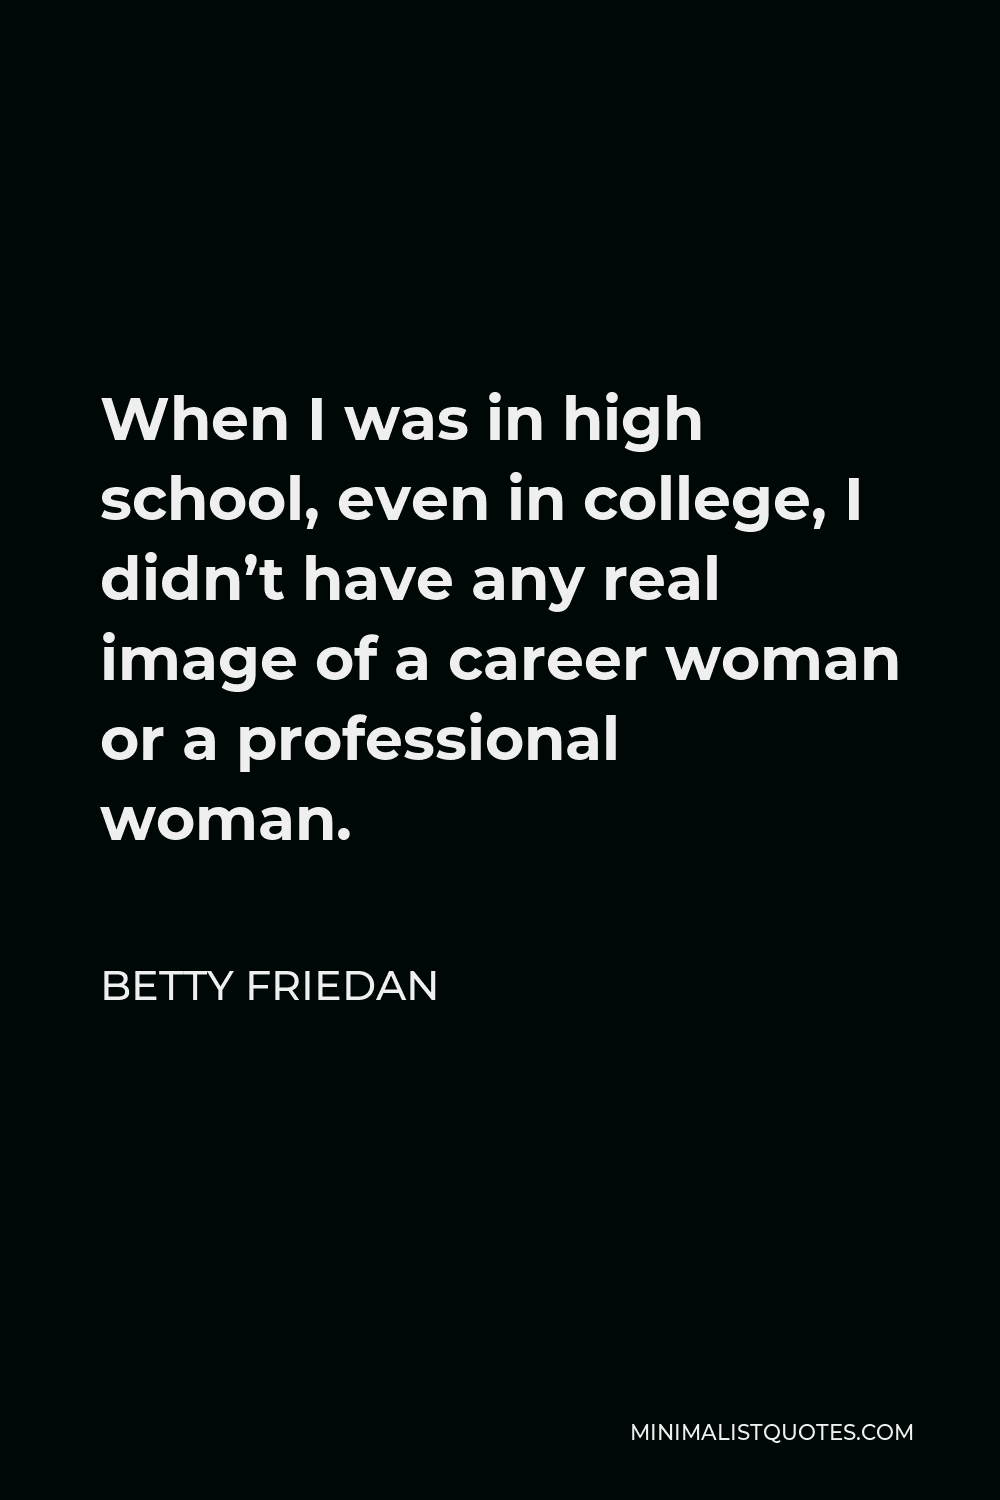 Betty Friedan Quote - When I was in high school, even in college, I didn’t have any real image of a career woman or a professional woman.